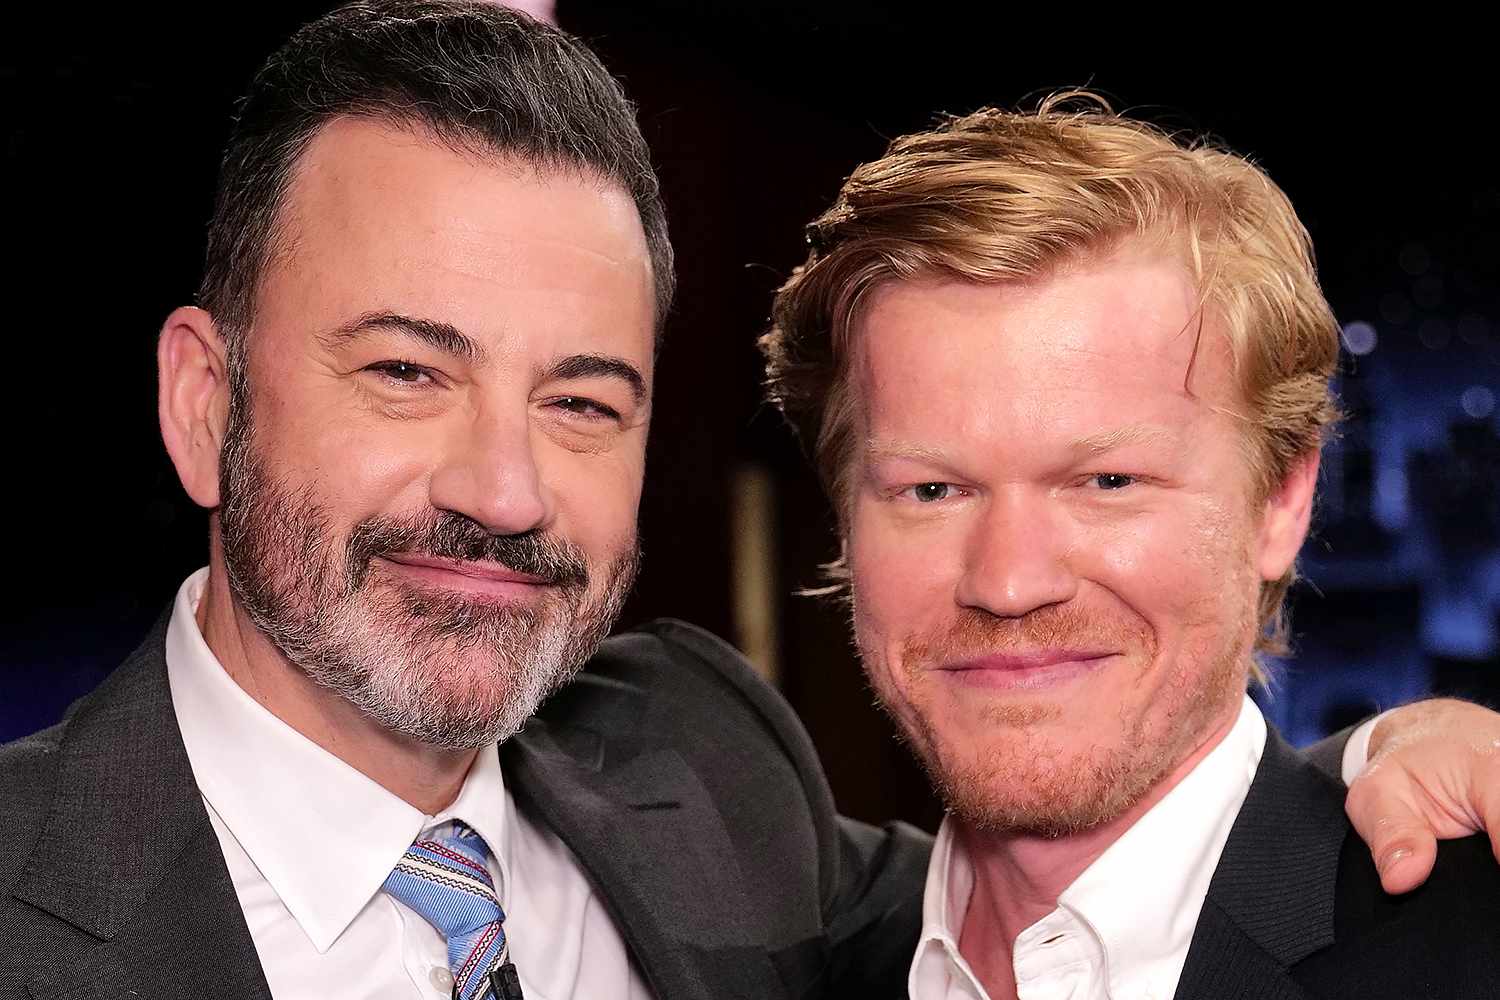 Jesse Plemons Says His Son Thinks Jimmy Kimmel's Son Billy Is the 'Funniest Kid' in Their Kindergarten Class